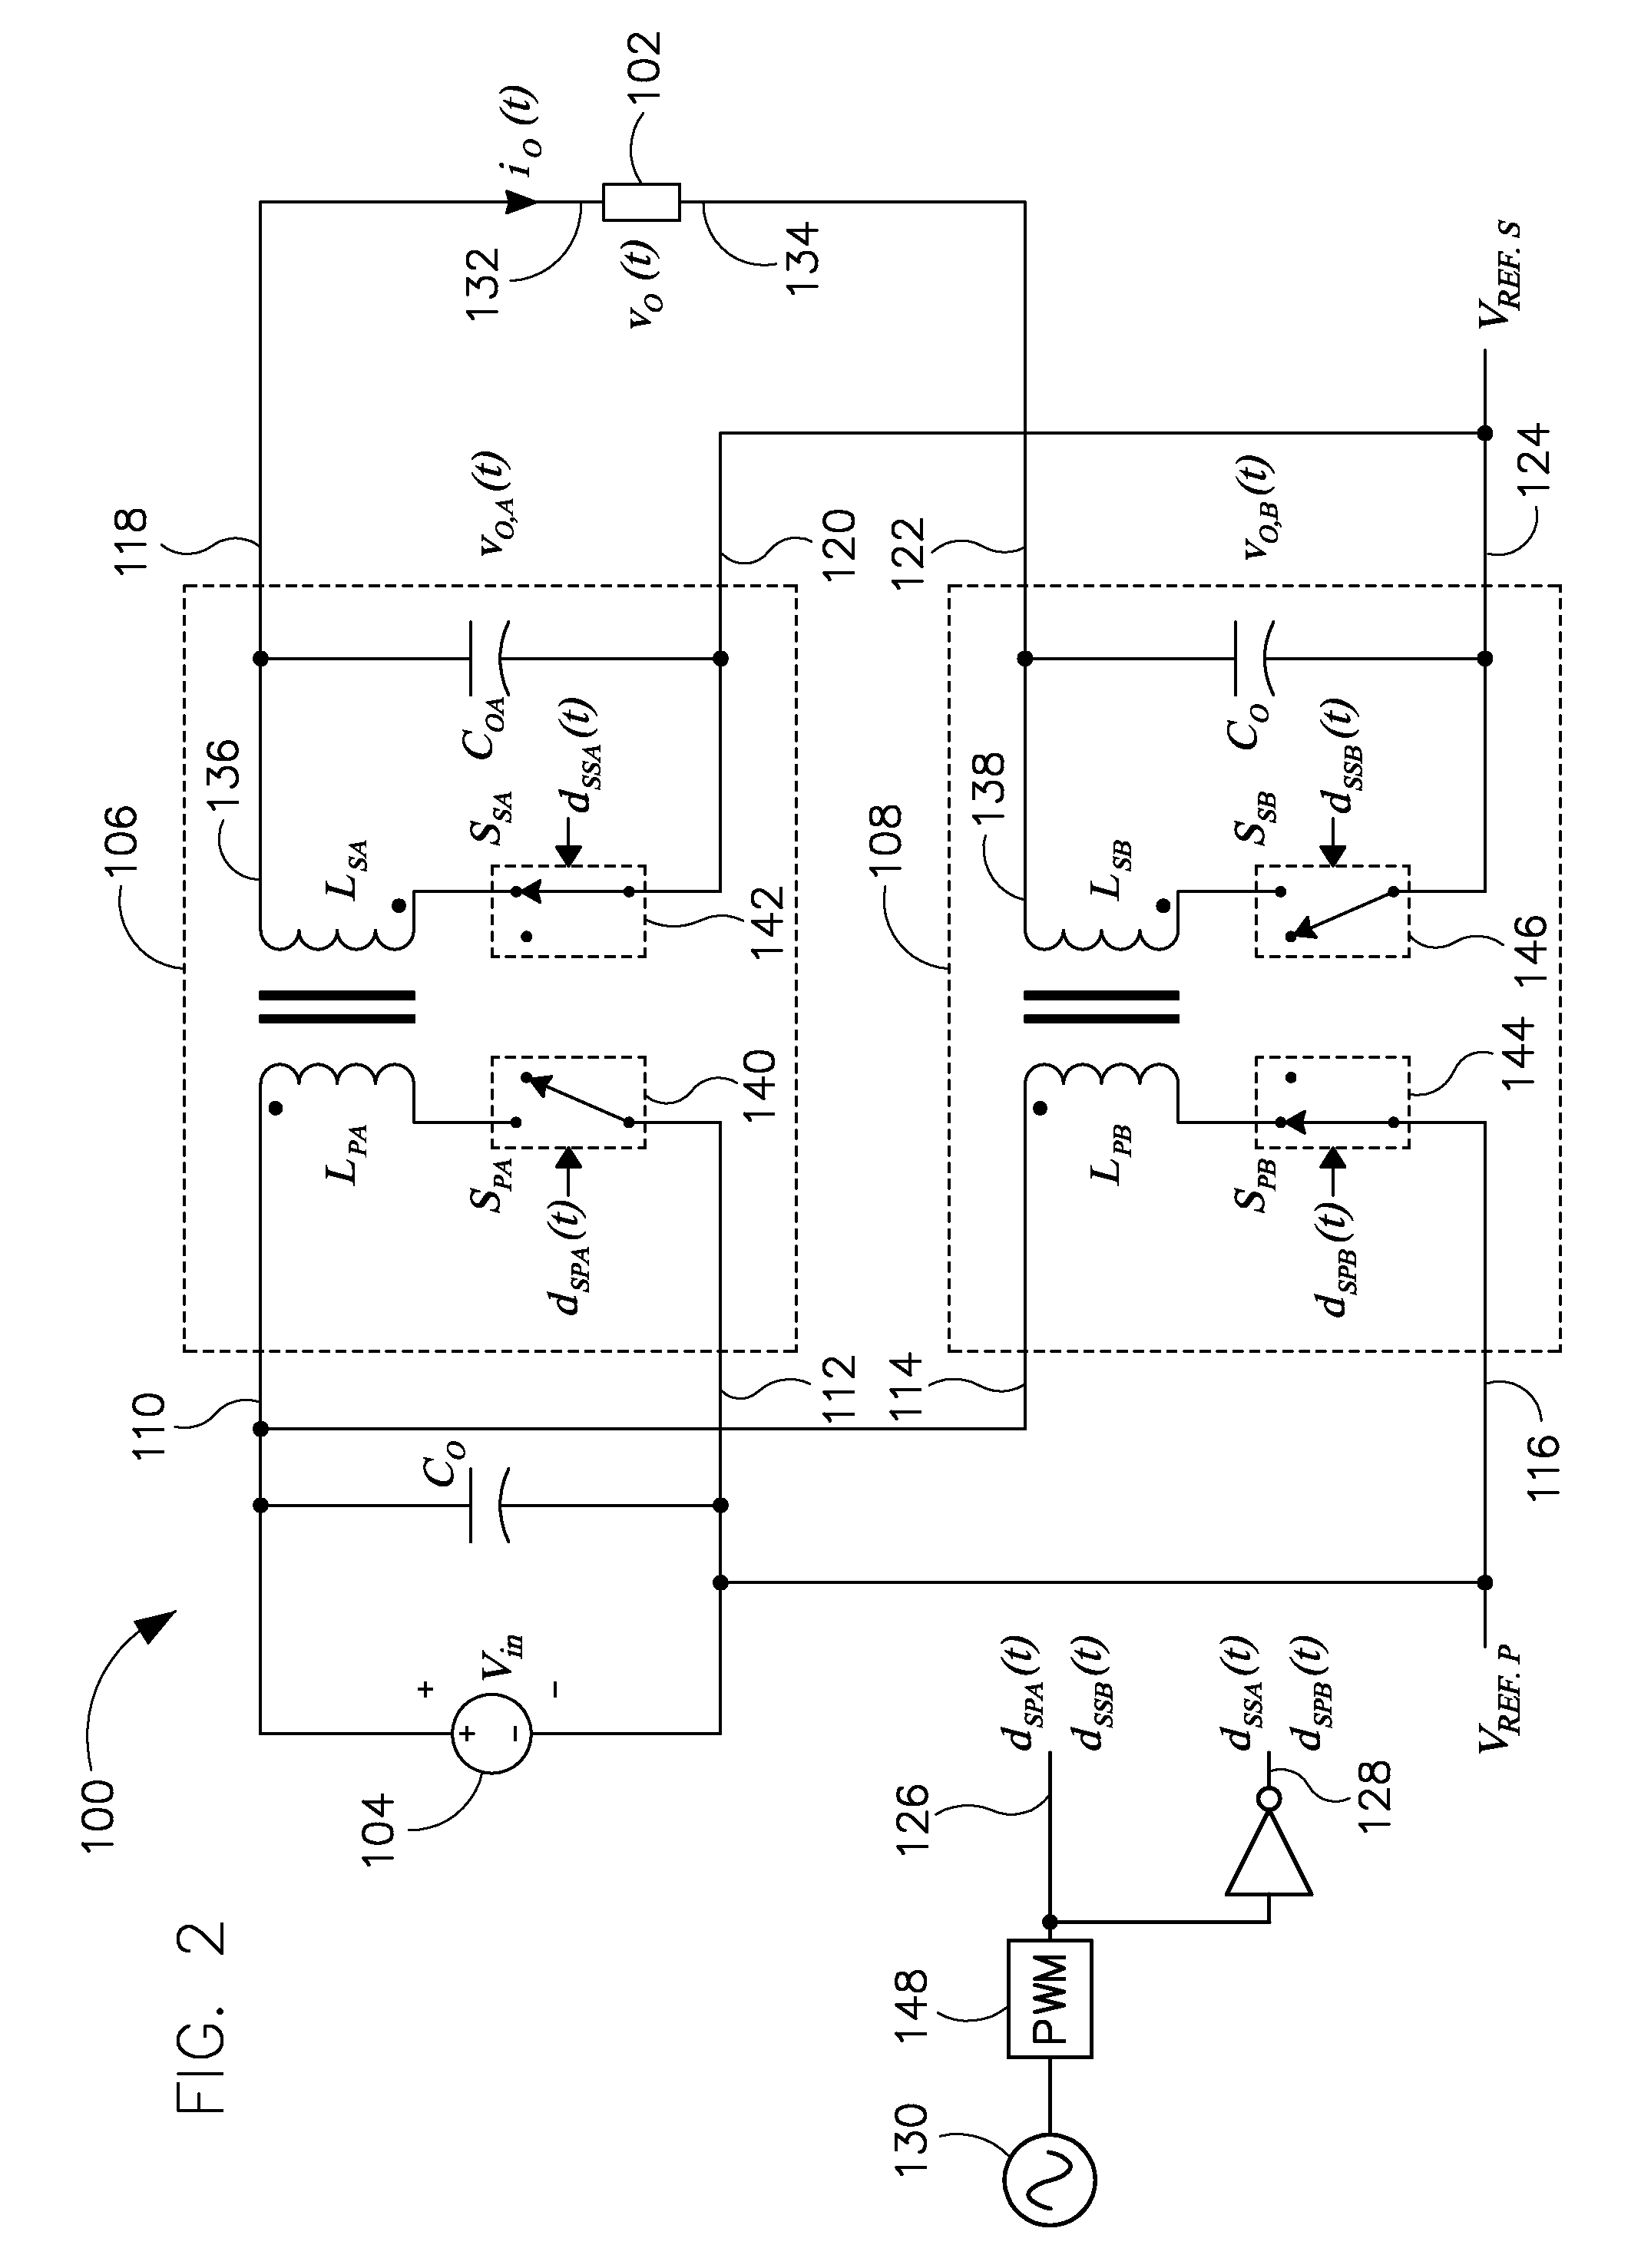 System for driving a piezoelectric load and method of making same